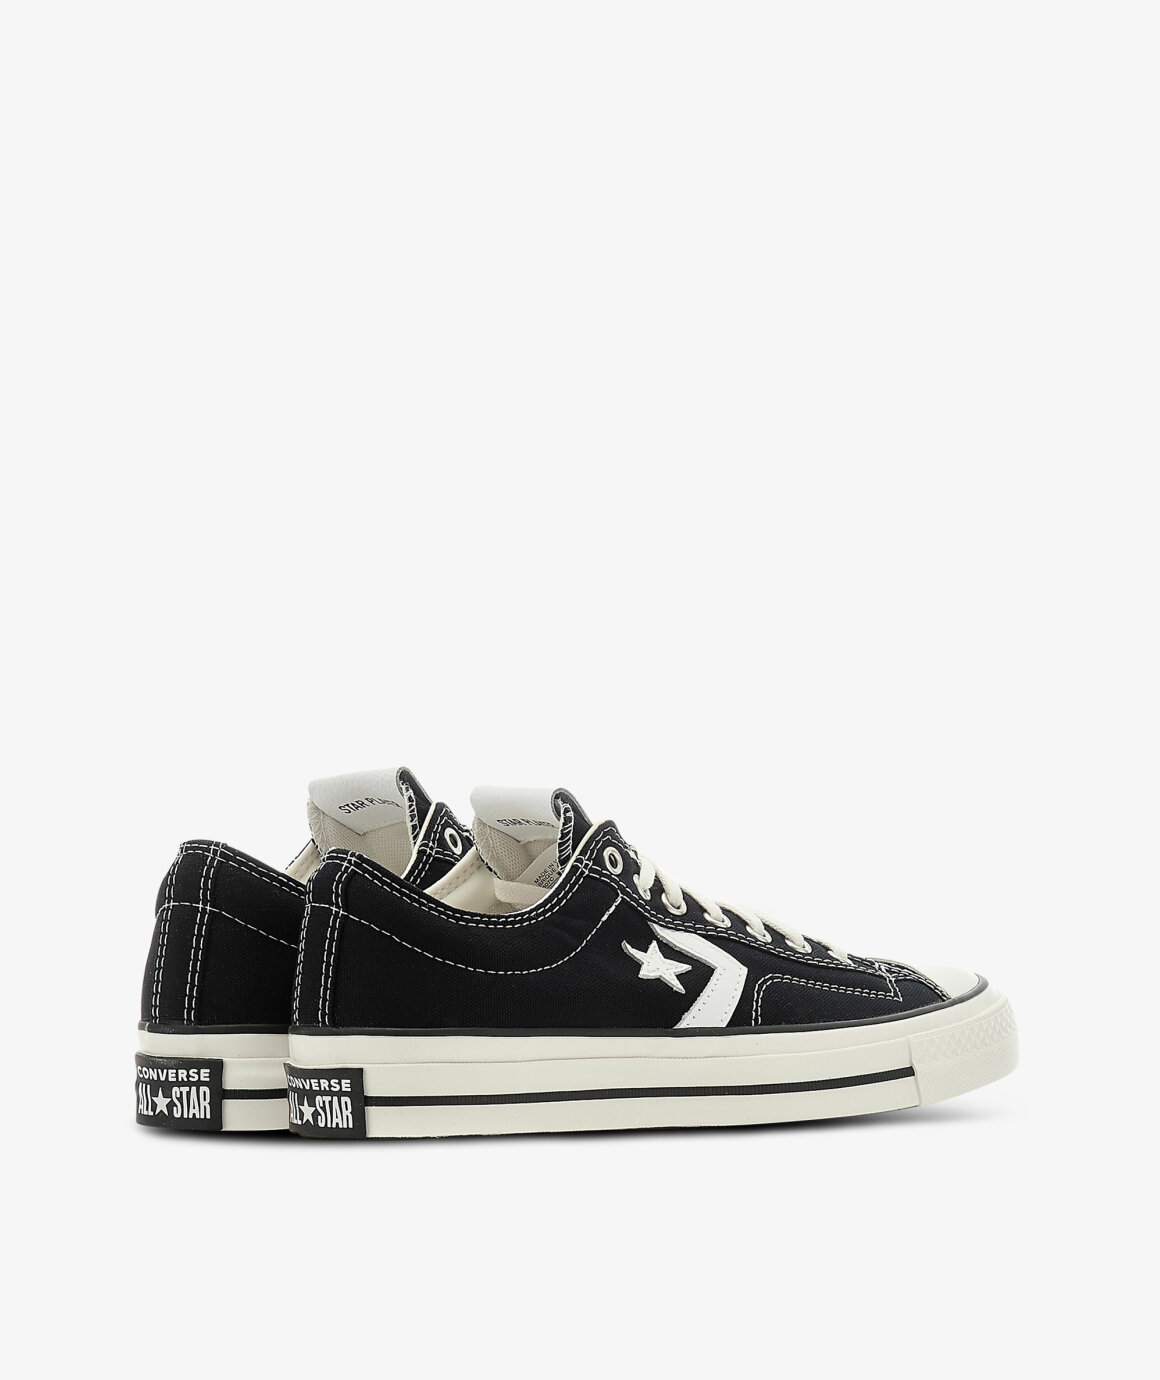 Norse Store | Shipping Worldwide - Converse Star Player 76 OX - Black